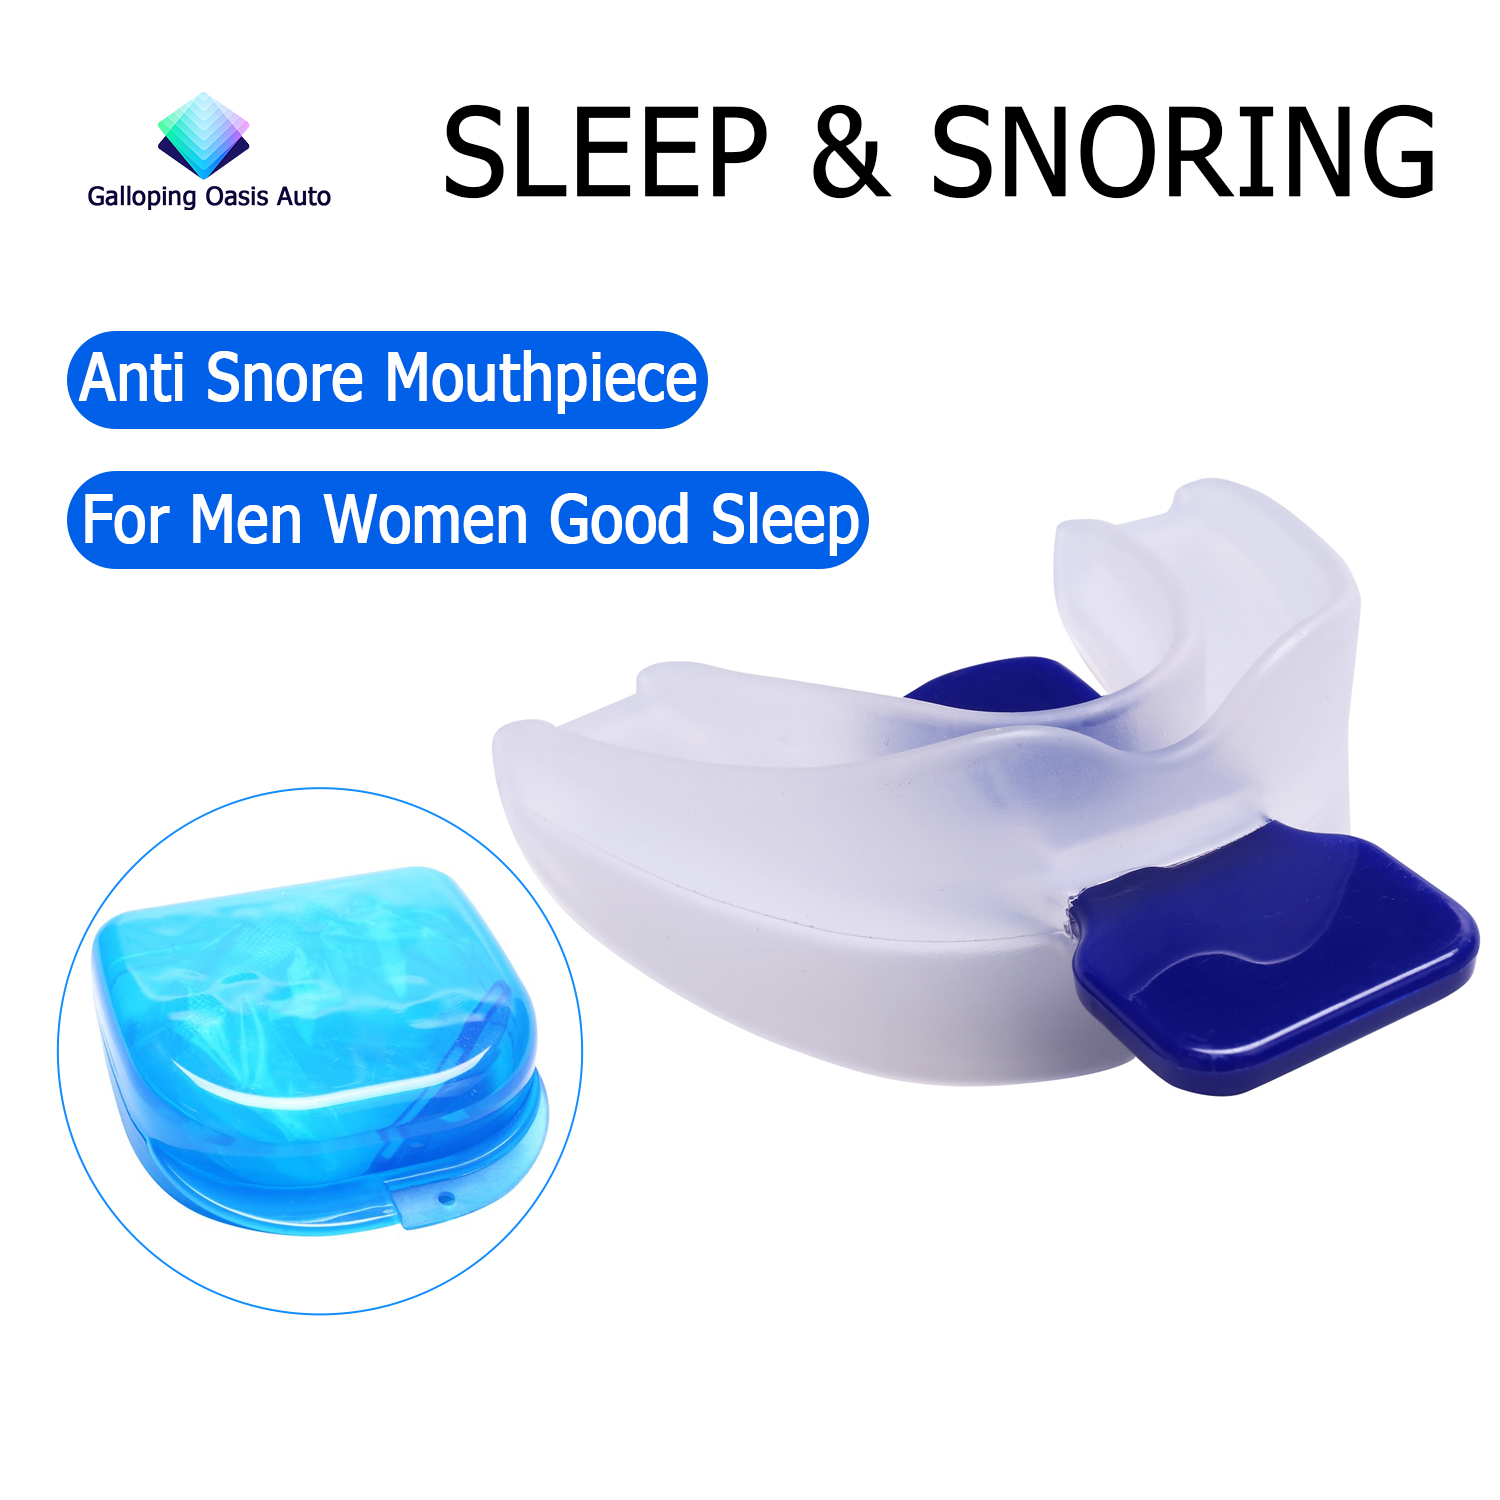 SnoreStop Mouthguard: Silicone Anti-Snoring Device for Better Sleep